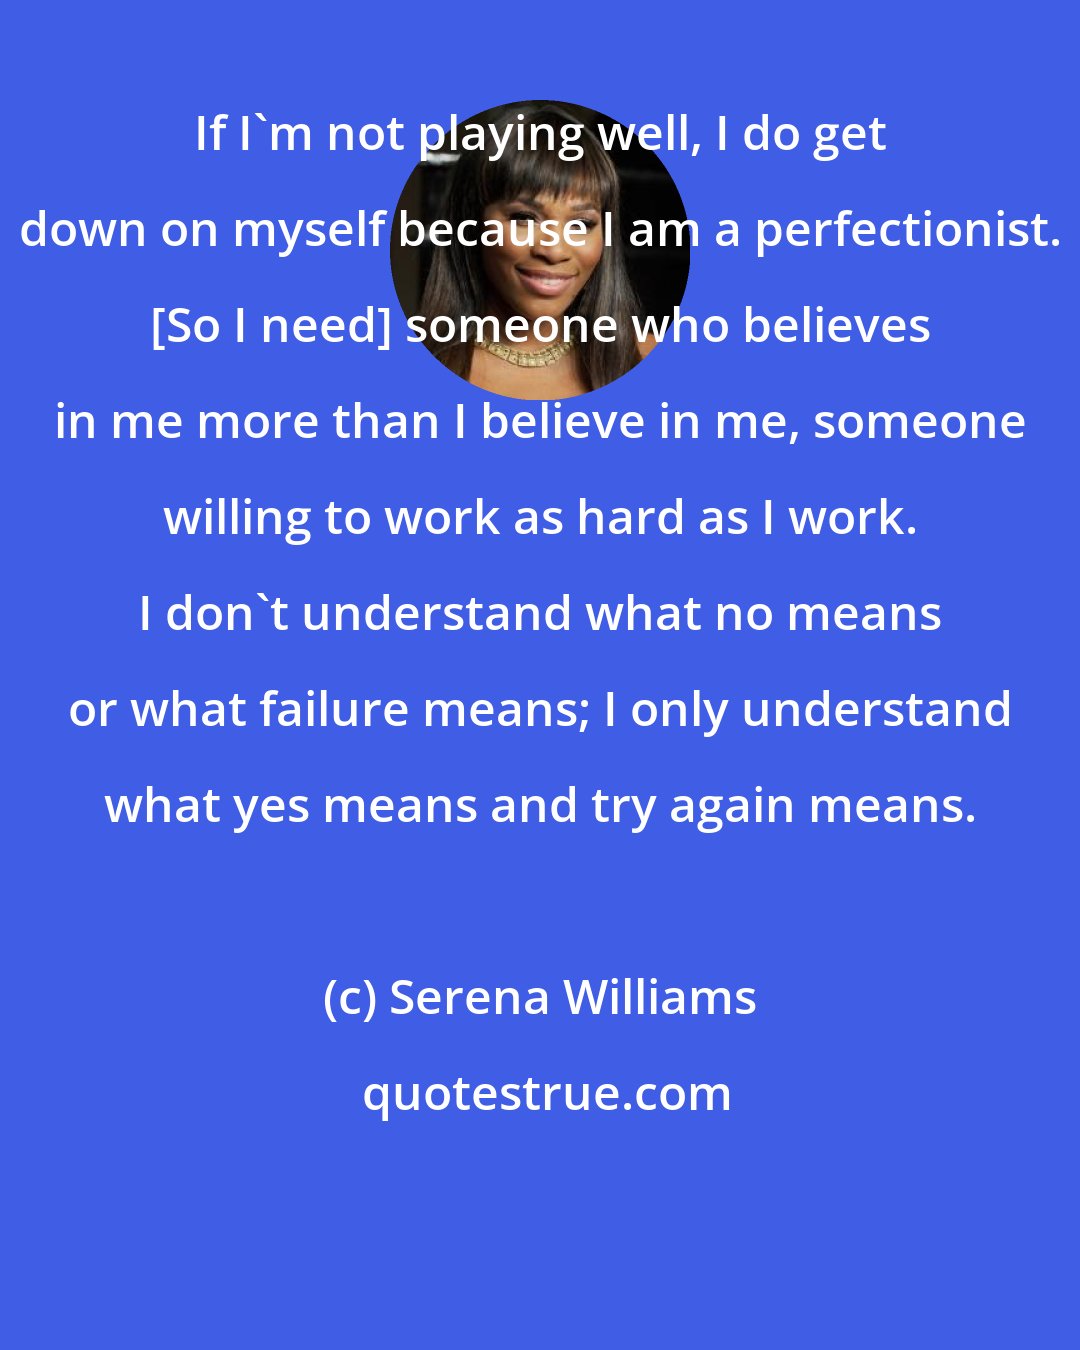 Serena Williams: If I'm not playing well, I do get down on myself because I am a perfectionist. [So I need] someone who believes in me more than I believe in me, someone willing to work as hard as I work. I don't understand what no means or what failure means; I only understand what yes means and try again means.